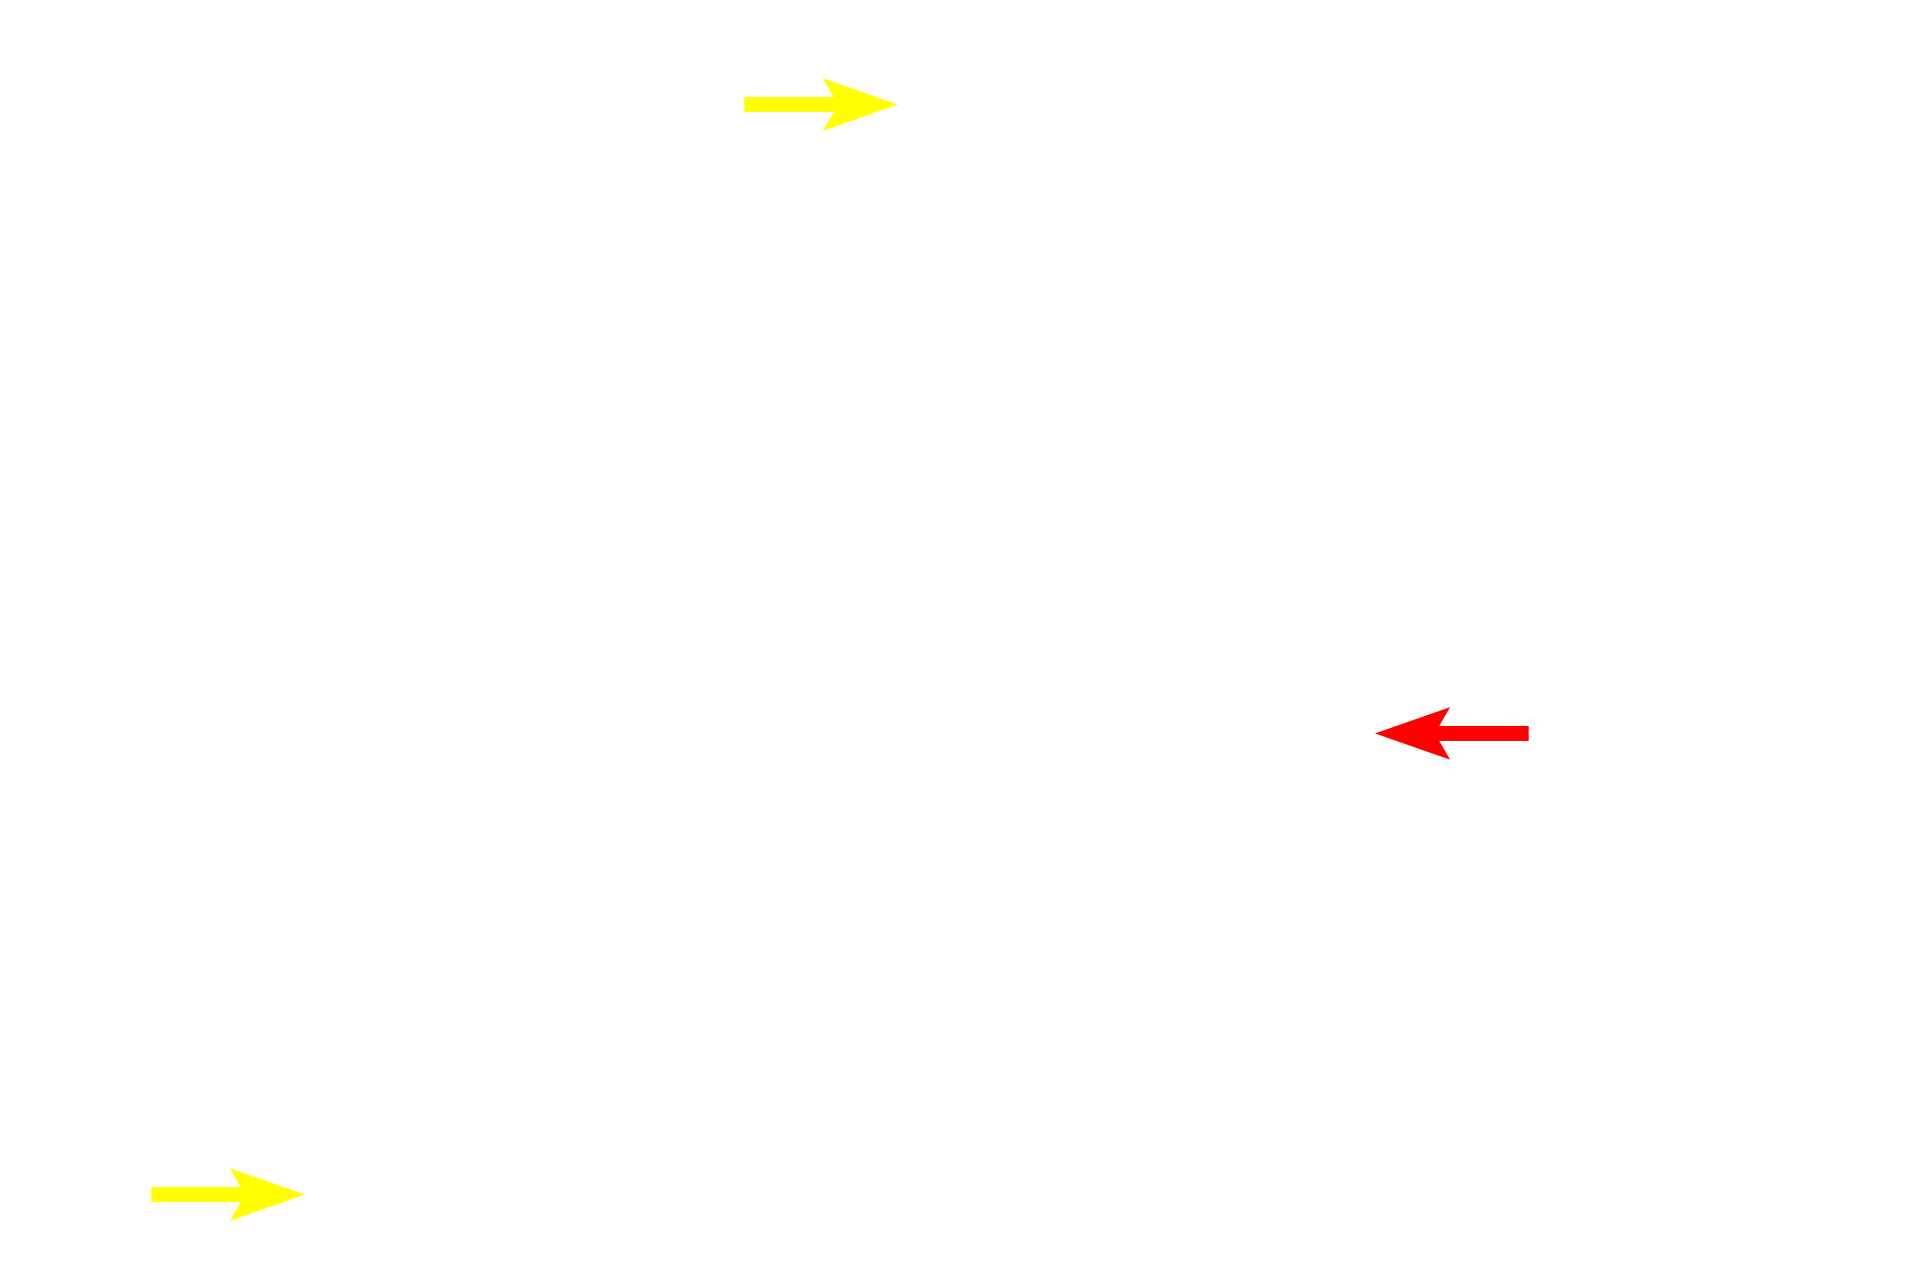  - Nucleoli <p>The nucleus can be located in different parts of a cell depending on the type of cell and distribution of organelles.  Note the basal location of the nucleus in the wedge-shaped cells of the pancreas on the left, and central location of the nucleus in the neuron on the right.  1000x, 1000x</p>
